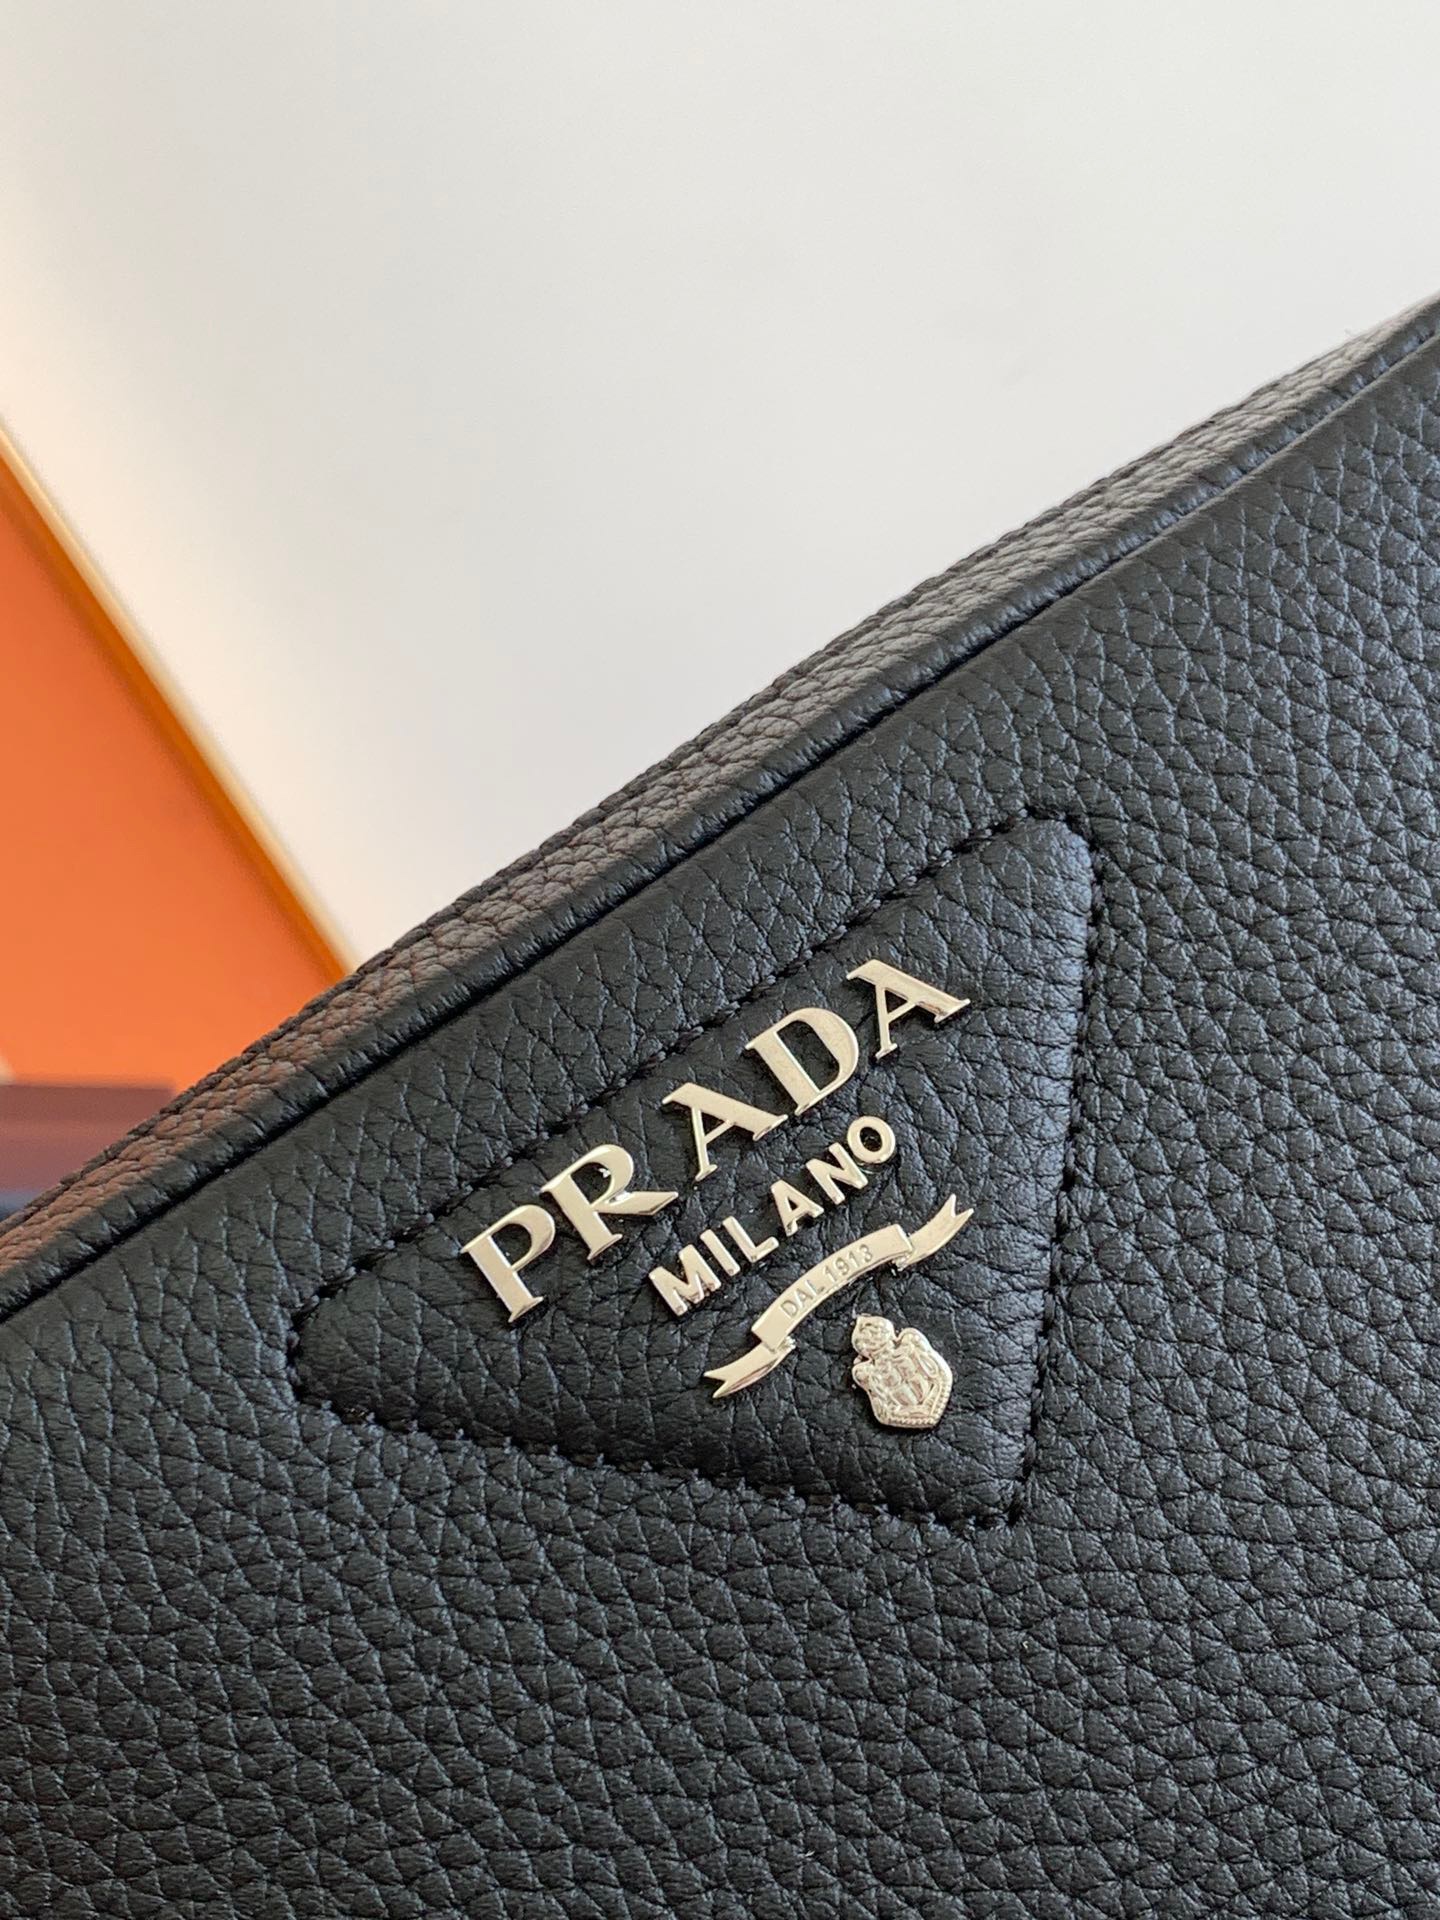 Prada Saffiano Leather Wallet With Wristlet Strap in Black